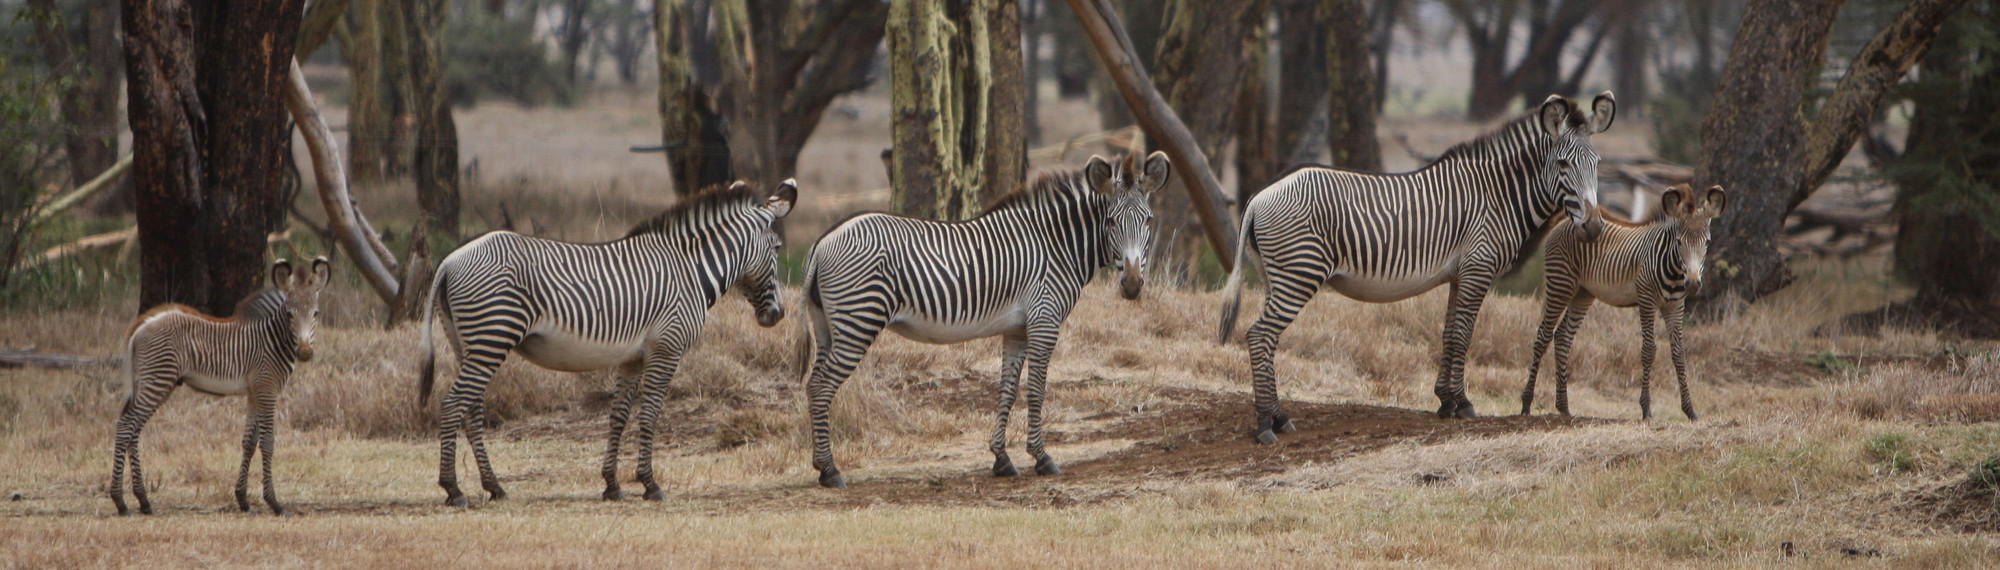 Five Grevy's Zebras standing in a long line with trees in the background